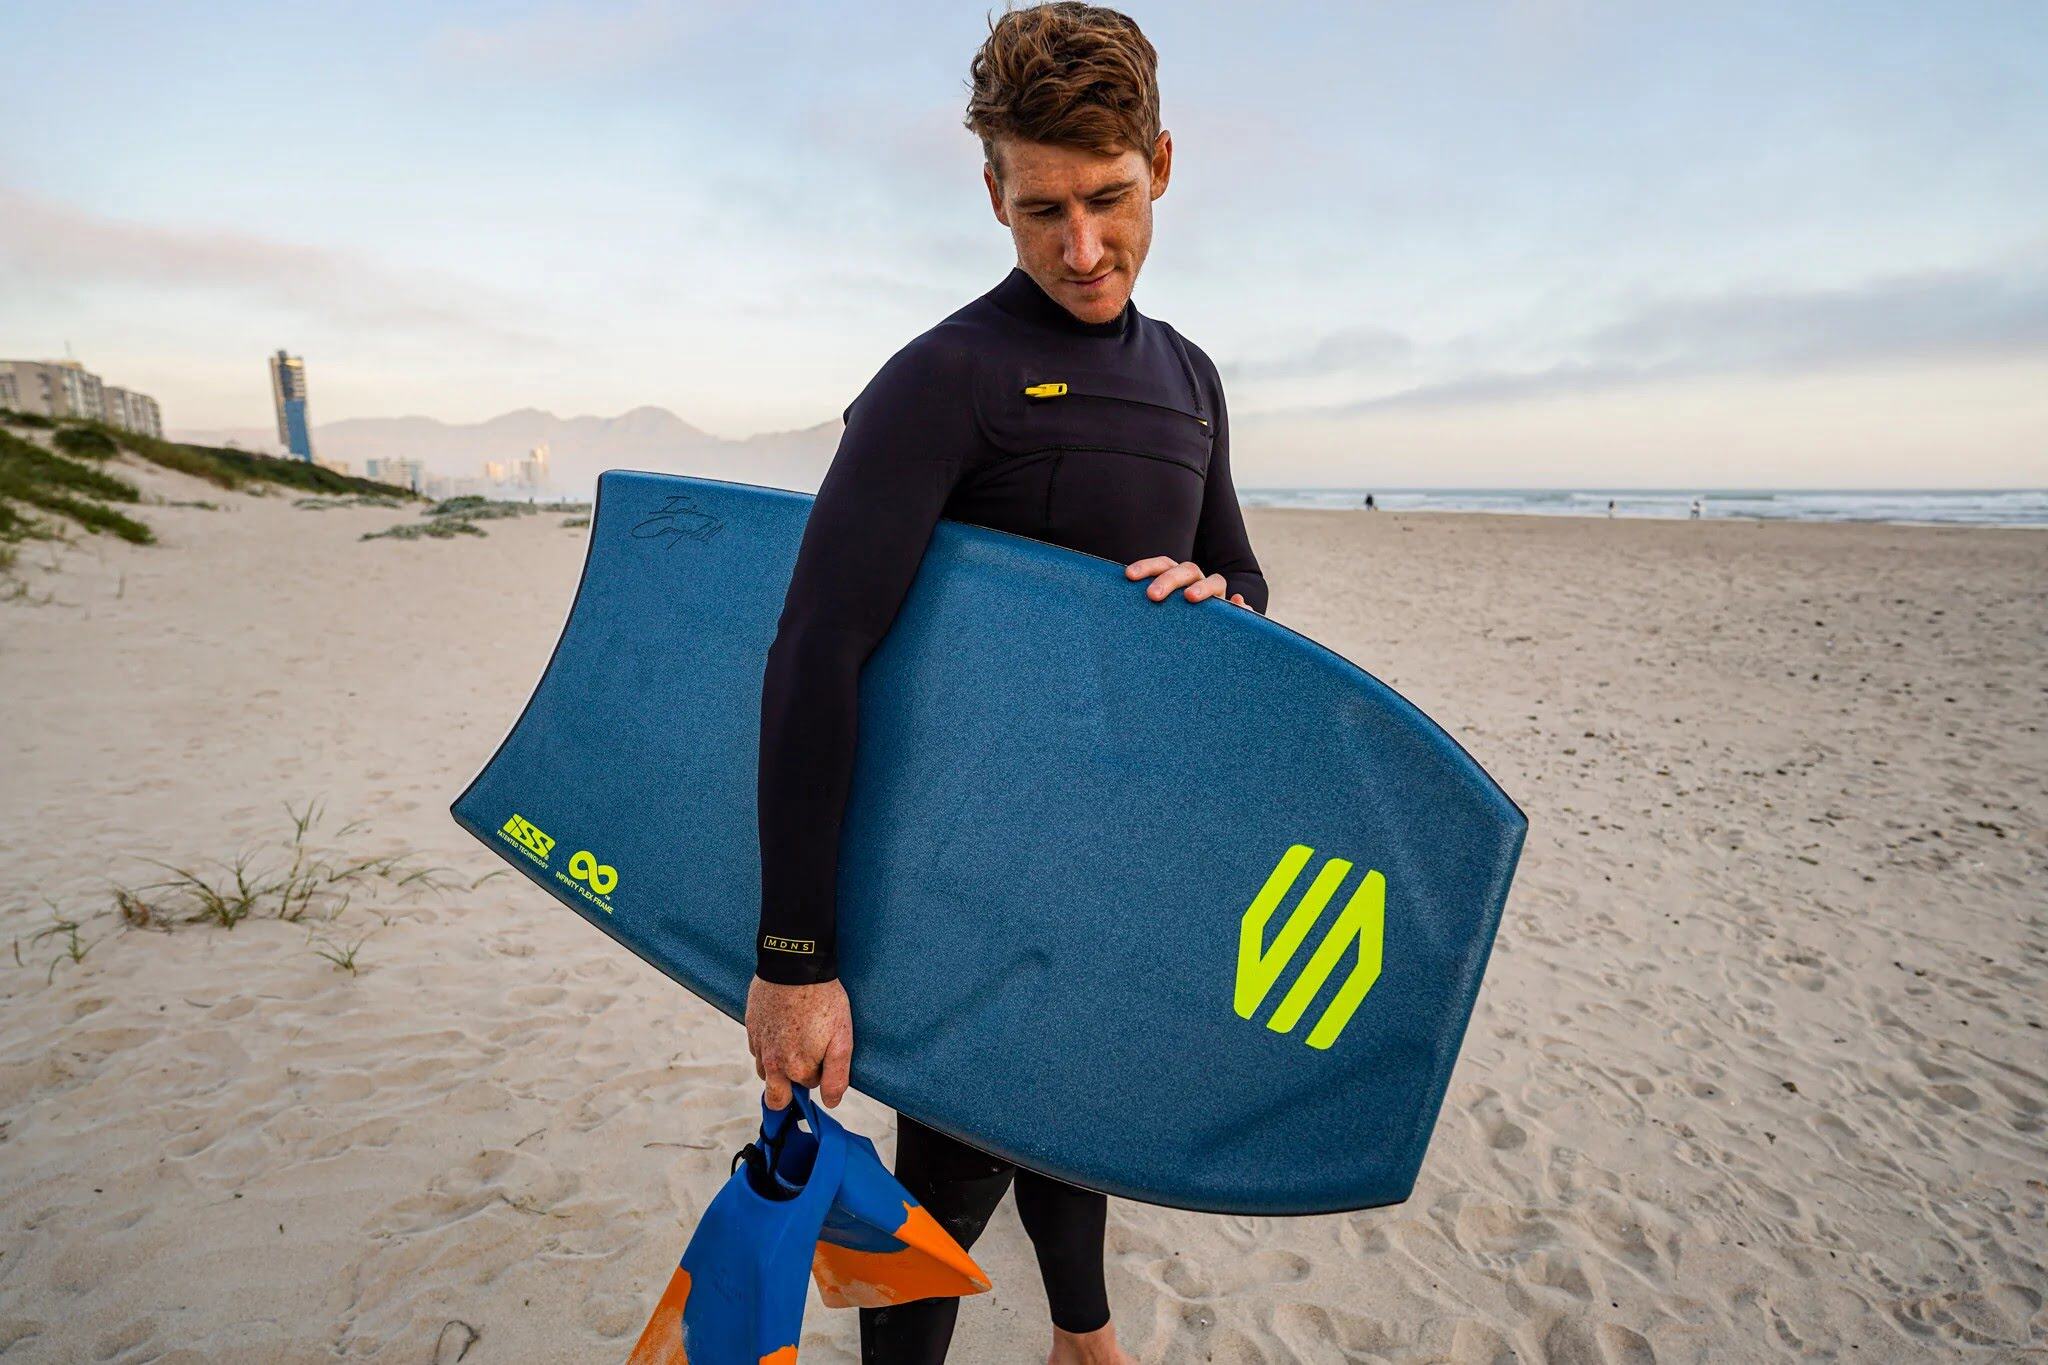 Bodyboard Review: The Perfect Water Sports Companion